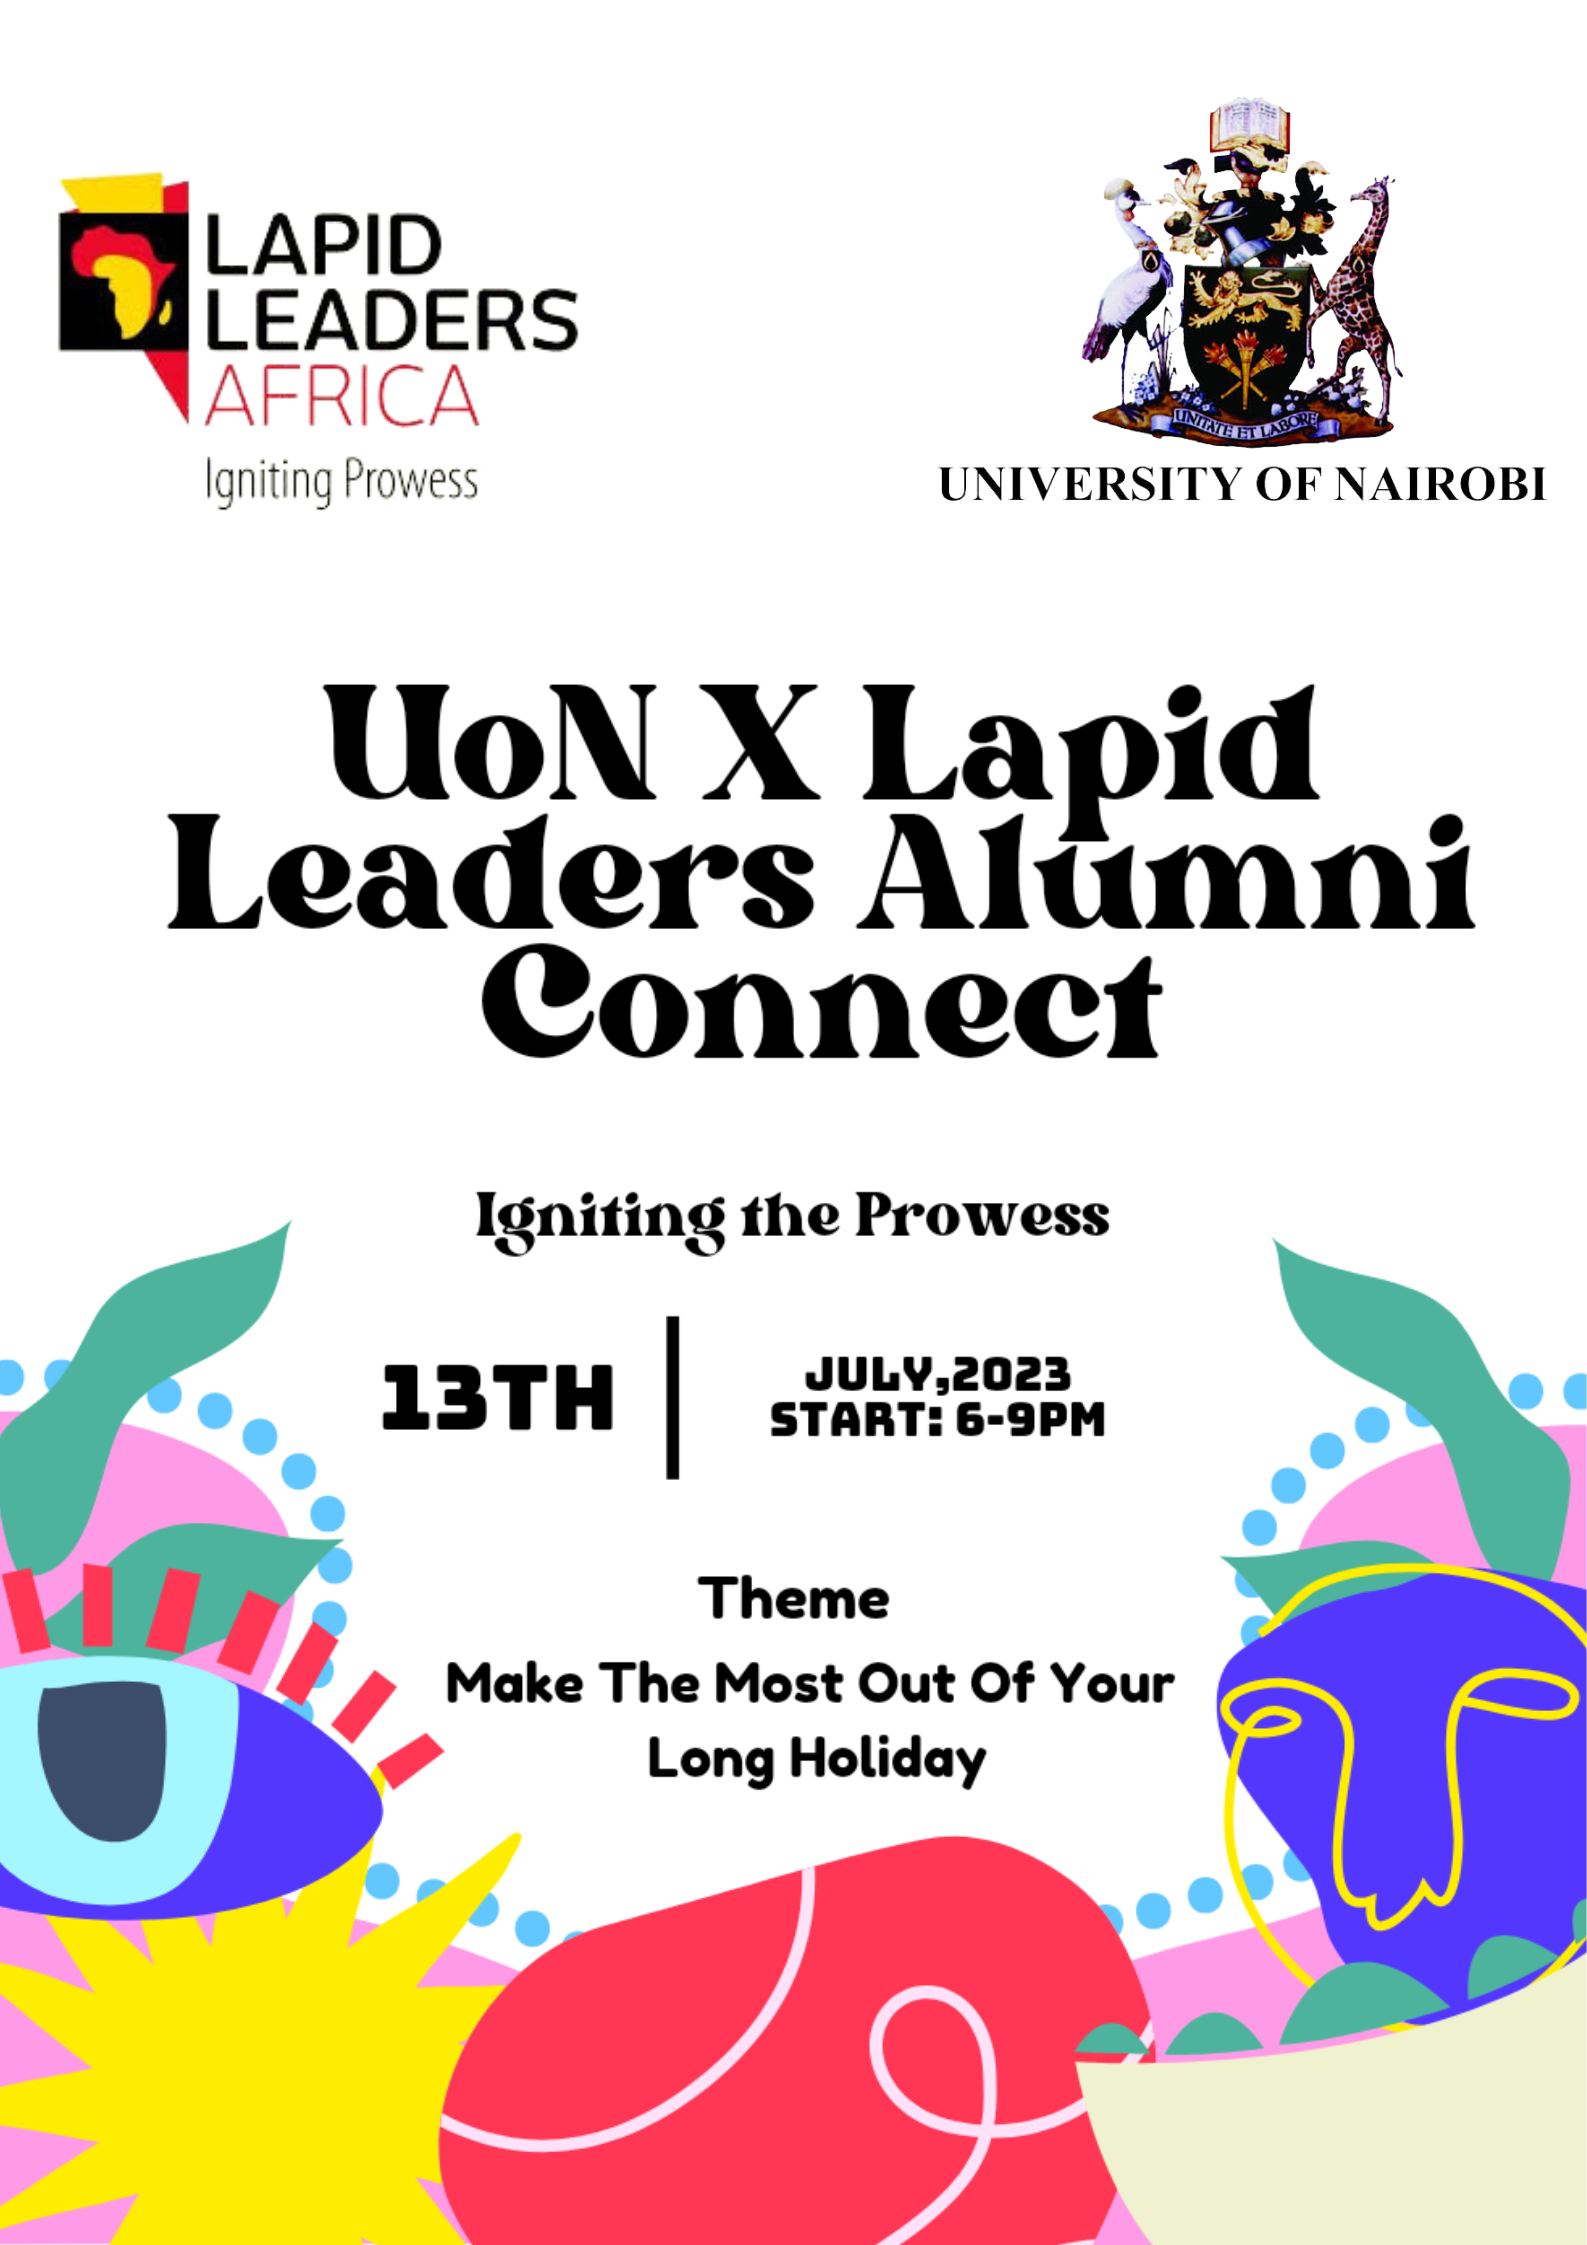 Lapid Leaders Africa X UoN Alumni Connect: Unlock the Full Potential of Your Long Holiday